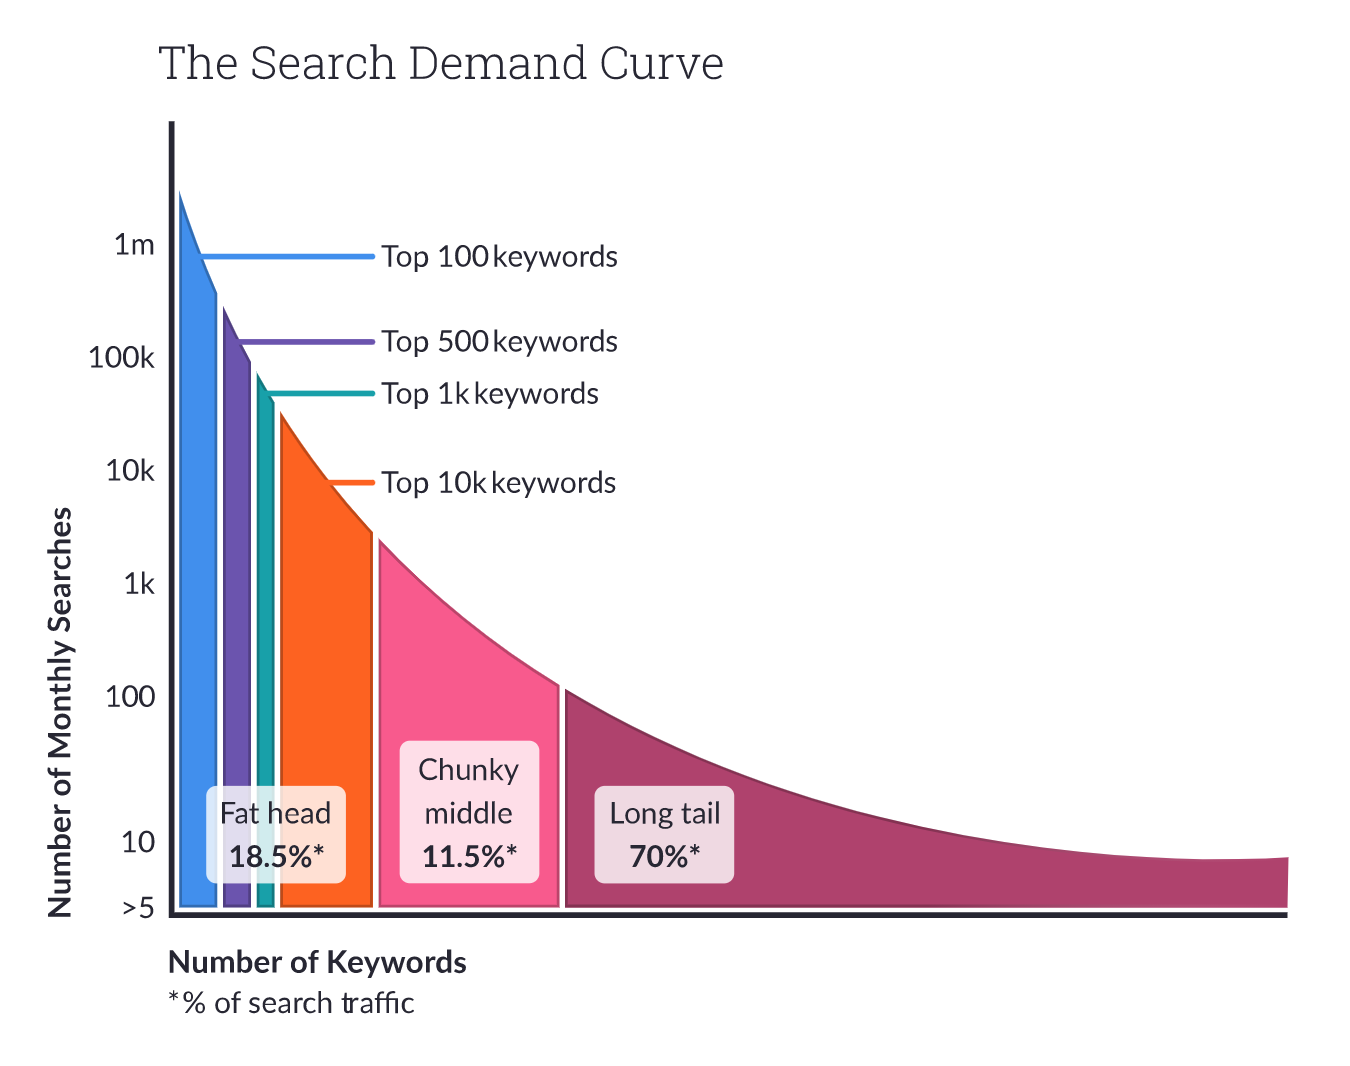 keyword research long tail keywords chunky middle keywords competition